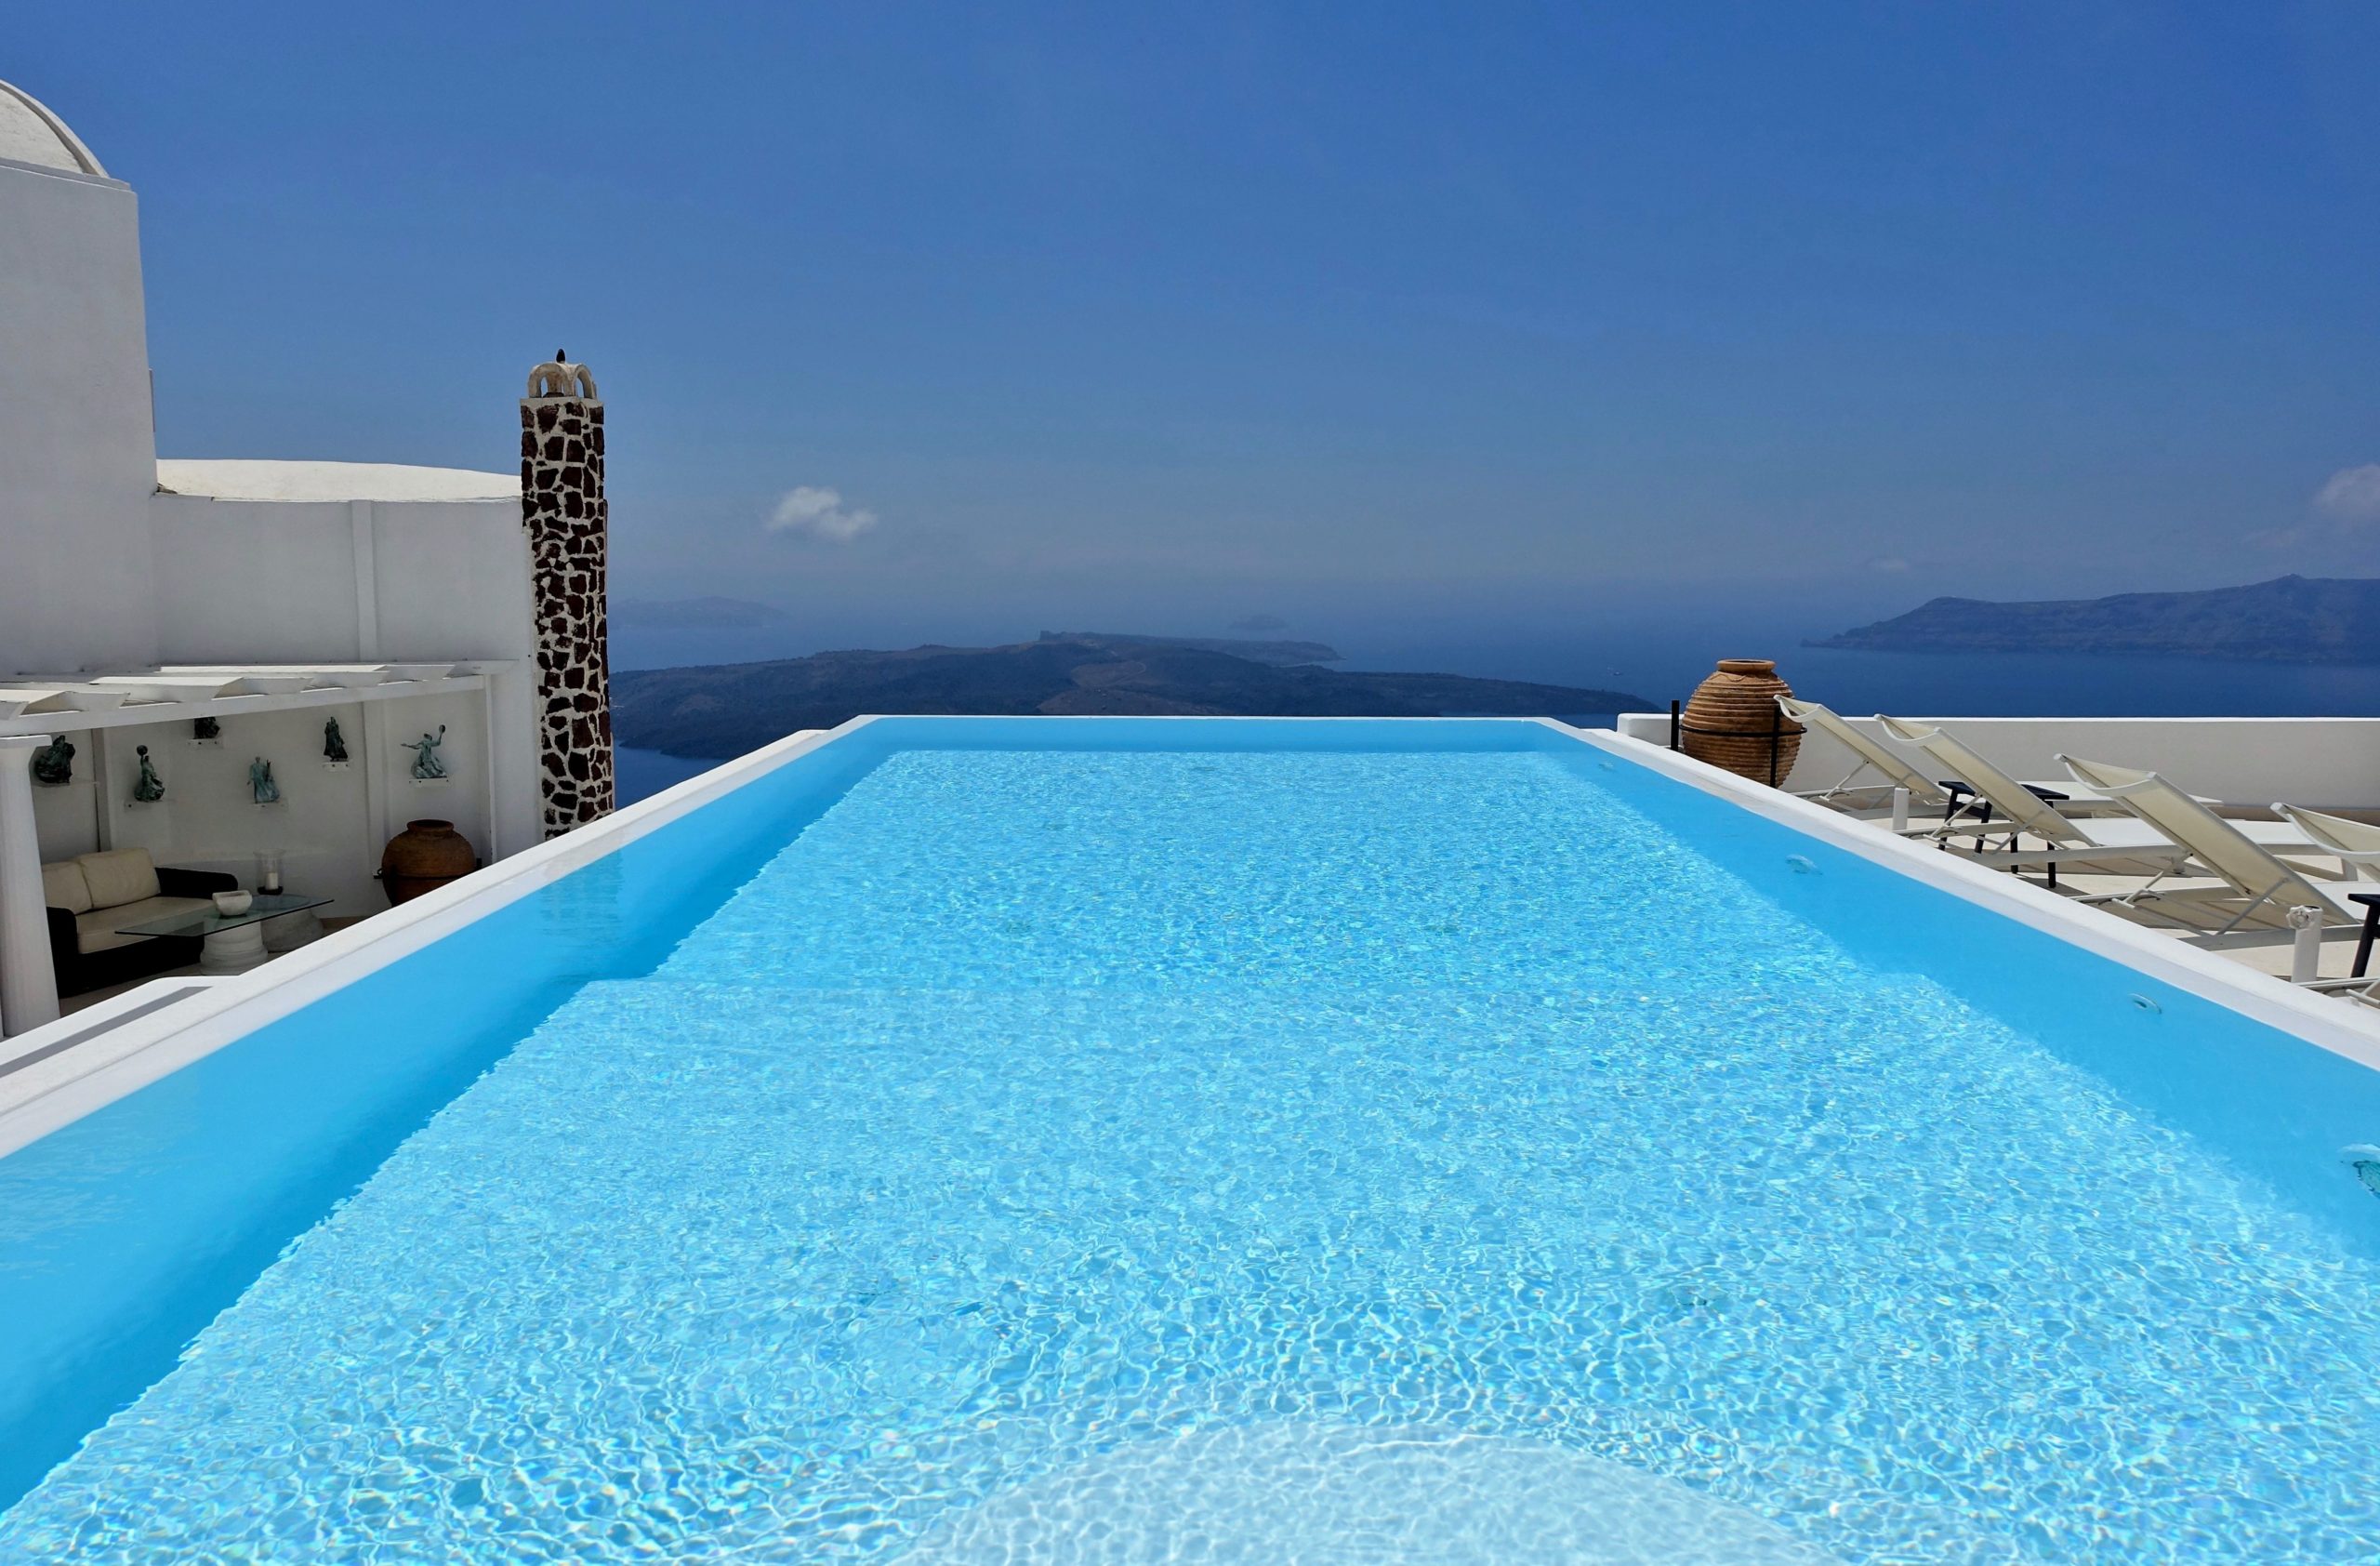 The infinity pool at Tsitouras Collection